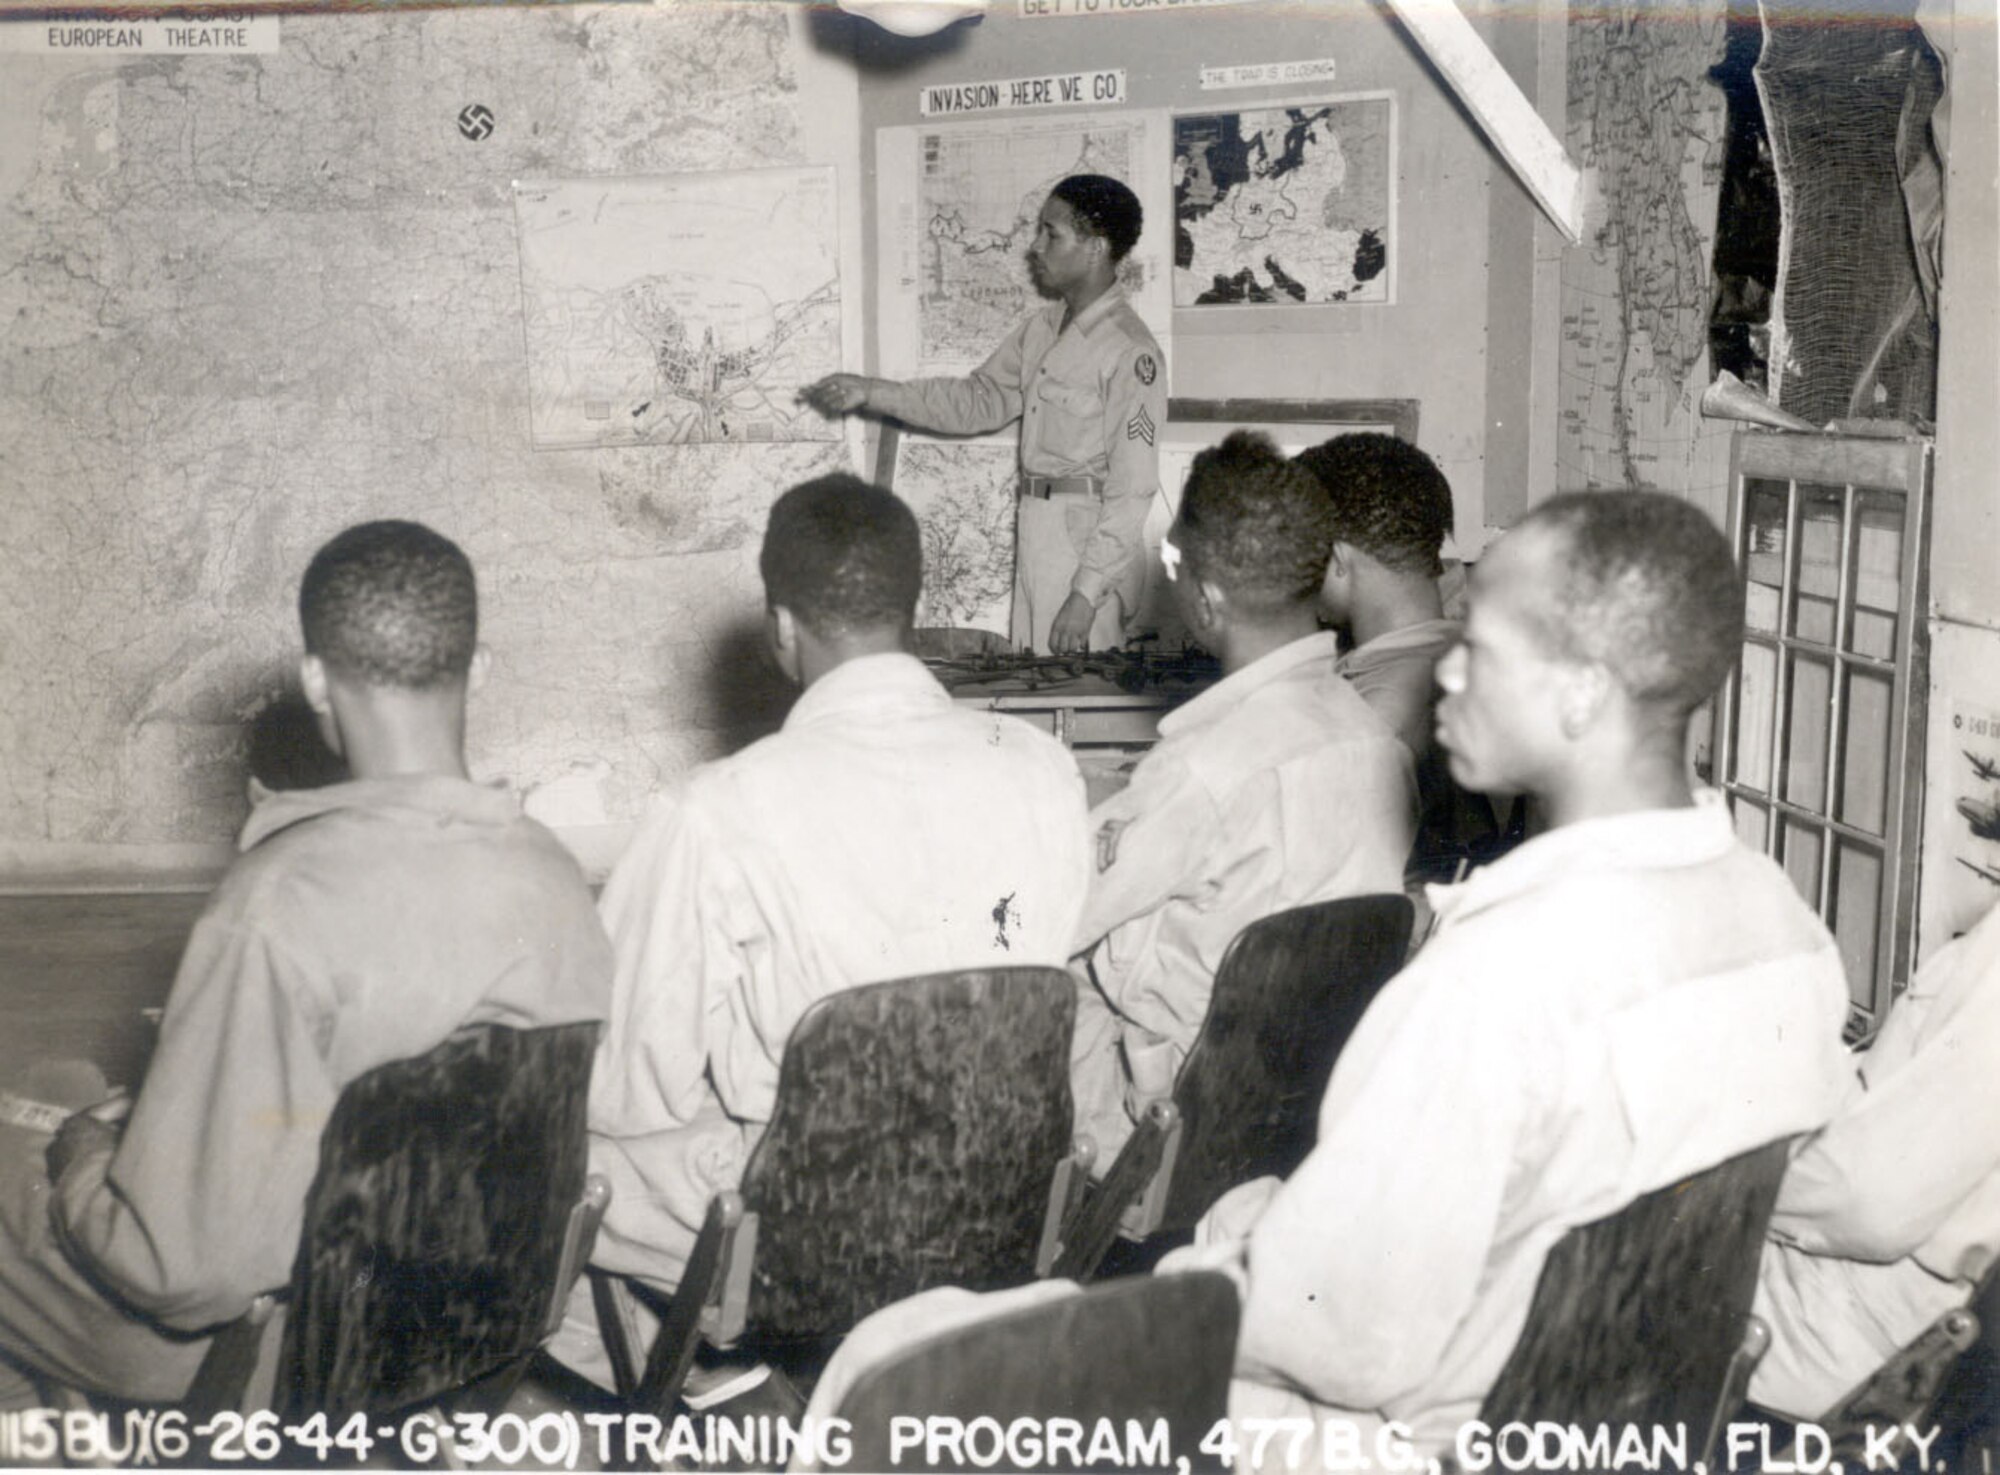 Members of the 477th Bombardment Group (Medium) receive an intelligence briefing at Godman Field, Fort Knox, Kent., on June 26, 1944. The 447th BG was assigned to First Air Force from April 10, 1944 to March 21, 1946.